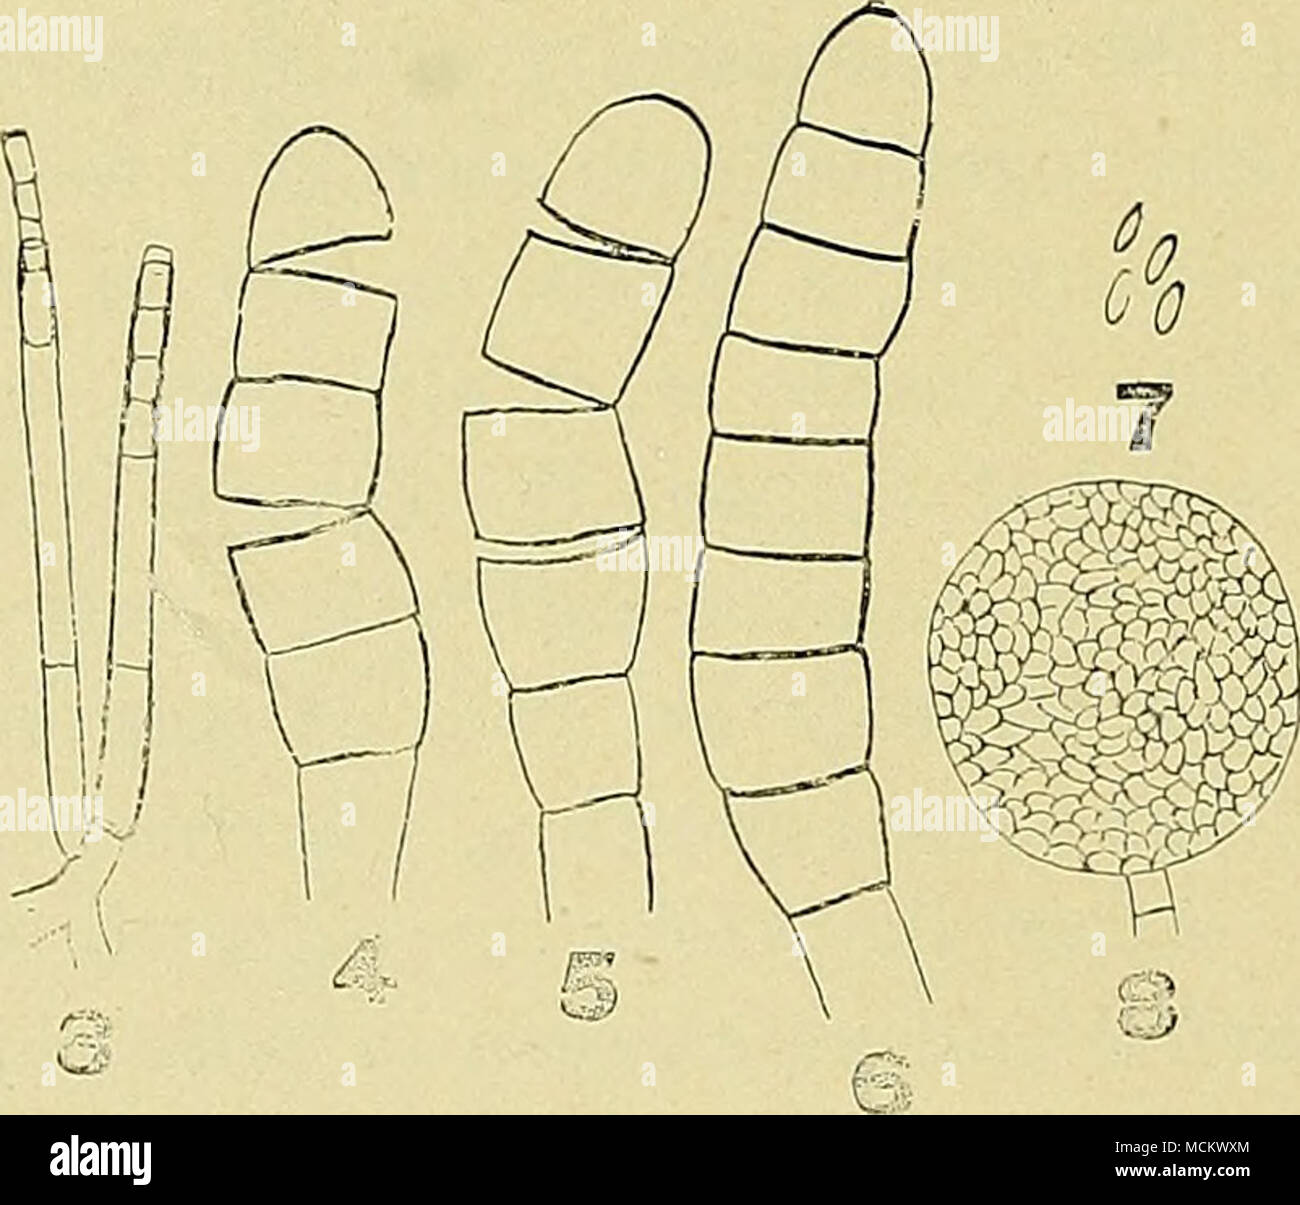 . Fig. 3. Endospores. Figs. 4, 5. Chlamydospores breaking up into individual spores. Fig. 6. Chlamydospores, unbroken. Fig. 7. Ascospores. Fig. 8. Ascus. spore case is formed on terminal branches. It has a somewhat swol- len base and a long tapering cell (Fig. 3). The endospores are form- ed in the apex of this terminal cell and are pushed out of the rup- tured end by the growth of the unfragmented protoplasm of the base. They are hyalin, thin-walled, oblong to linear 10-25ux4-5u. The second kind of spores formed are the chlamydospores (Figs. 4-6). These are thick-walled dark brown bodies, bor Stock Photo